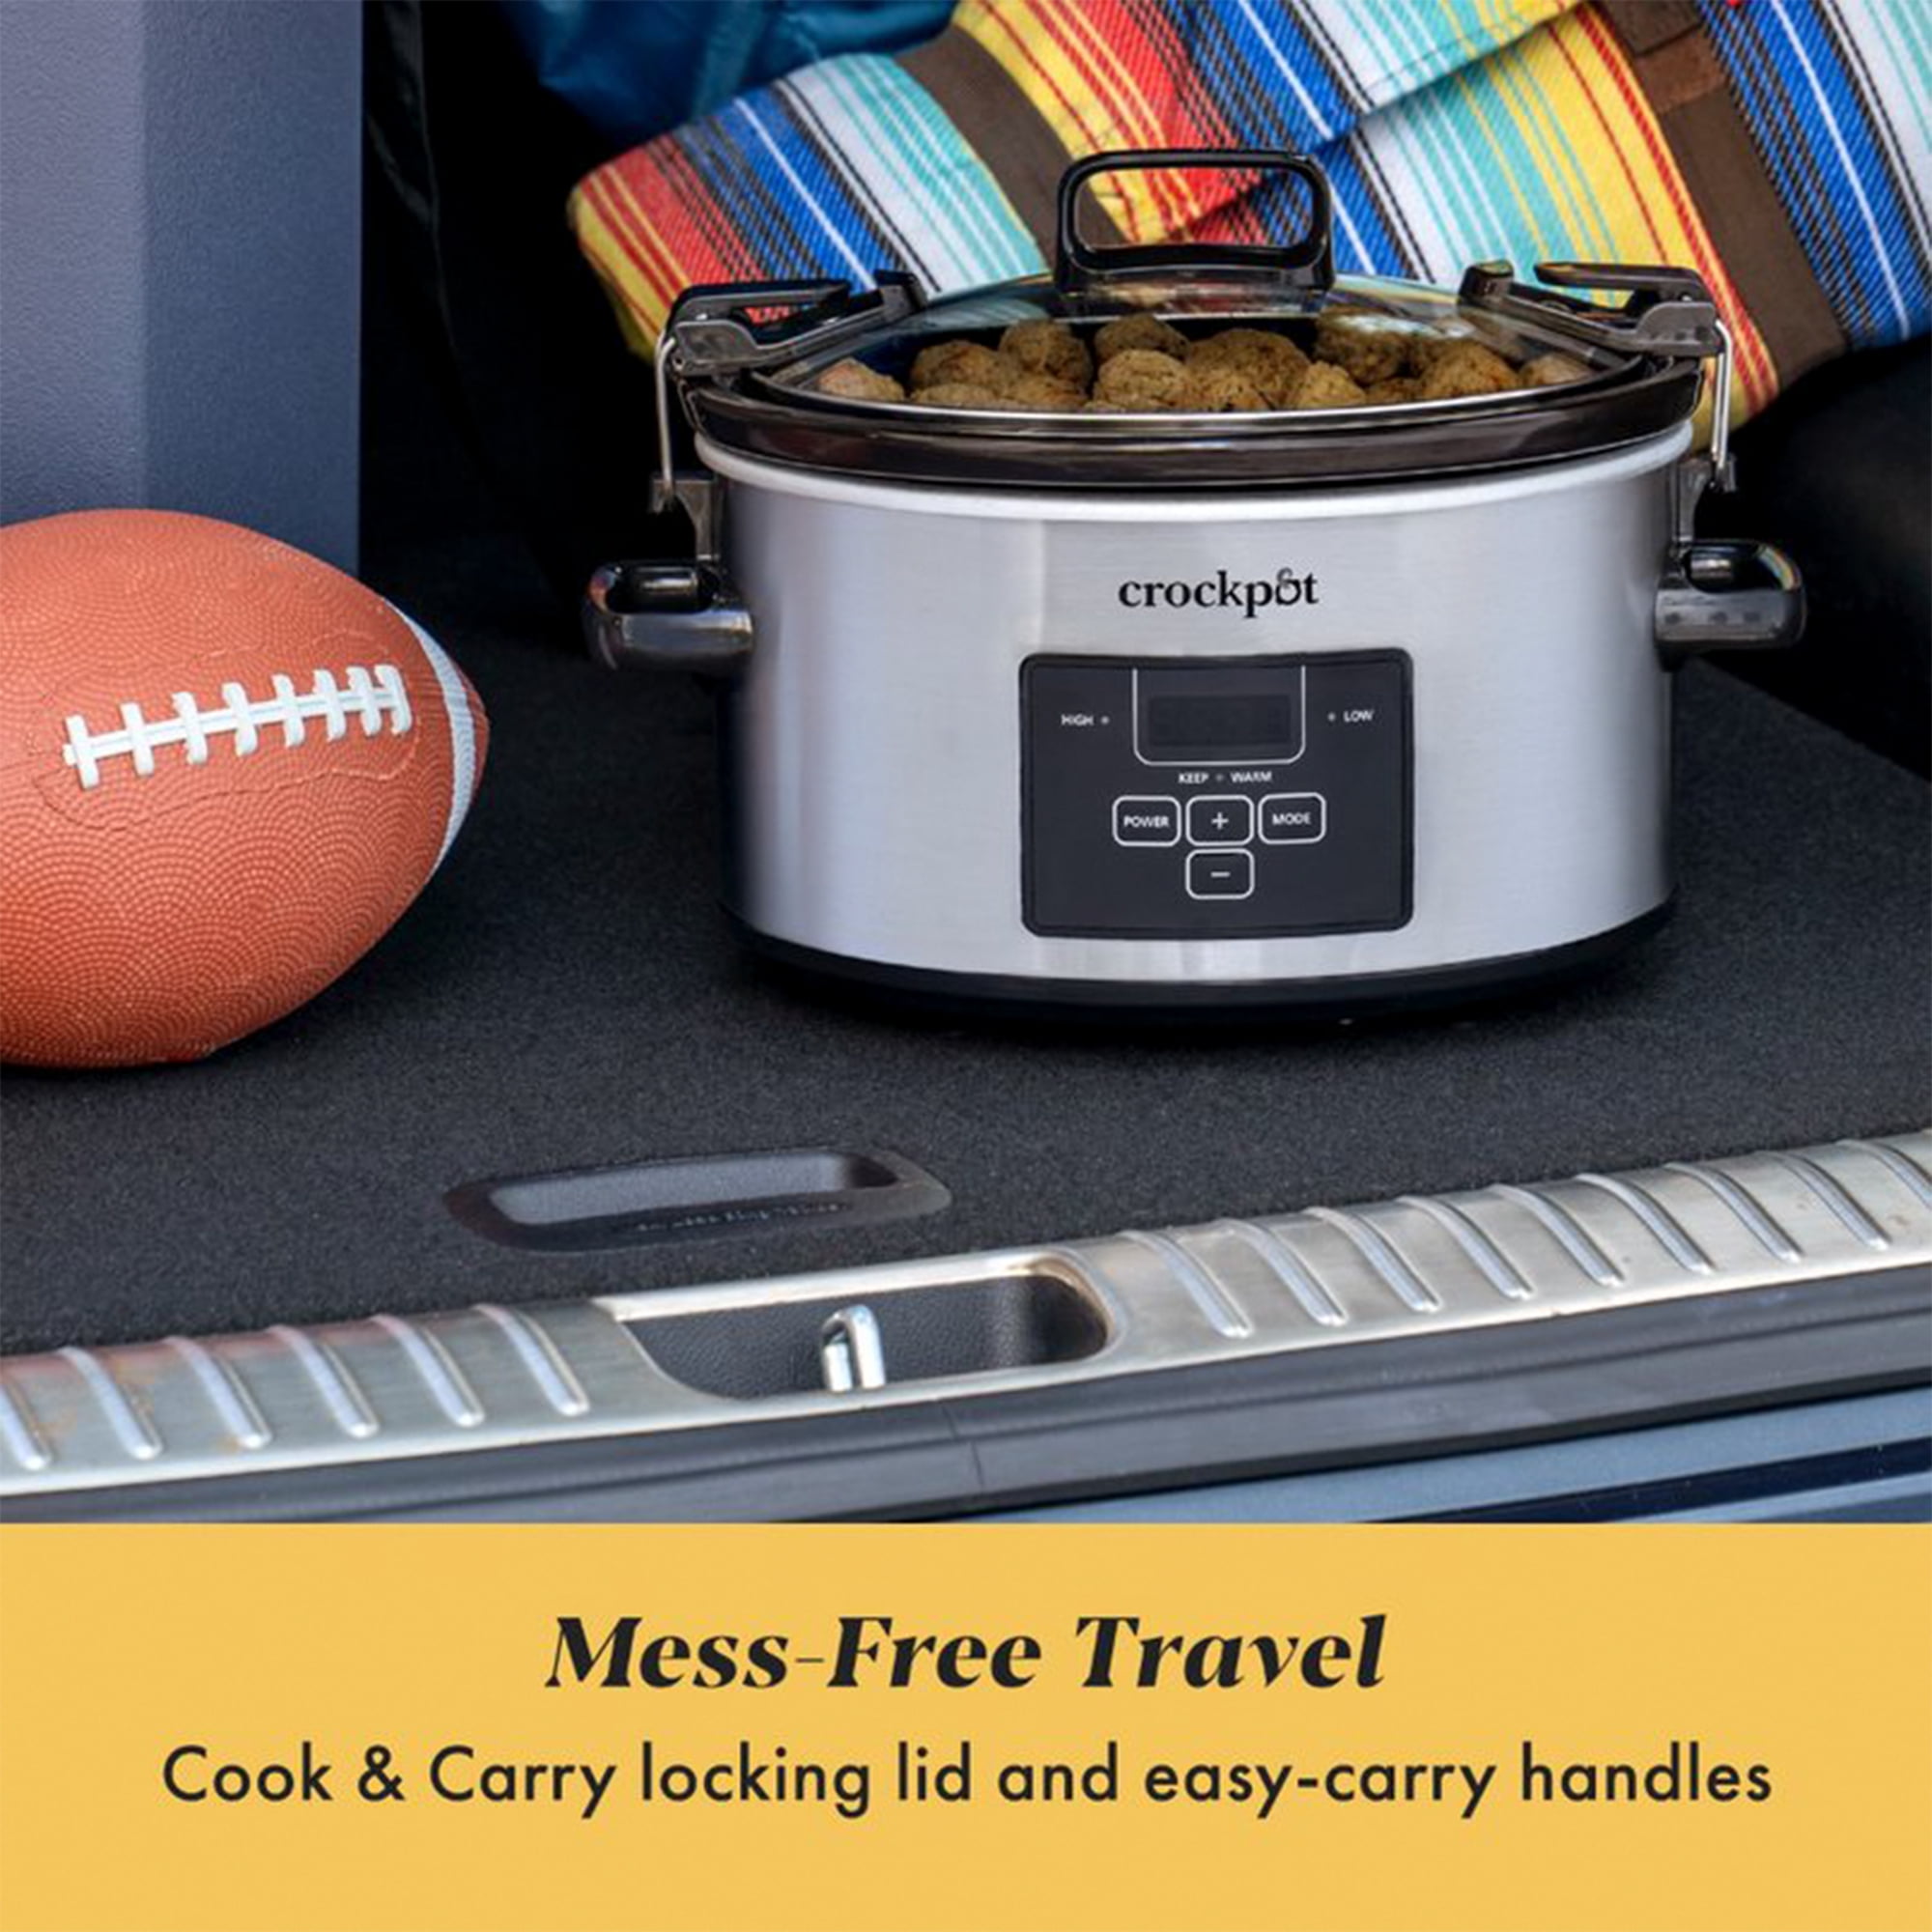 Crock-Pot 4 Quart Cook and Carry Programmable Slow Cooker, Stainless Steel